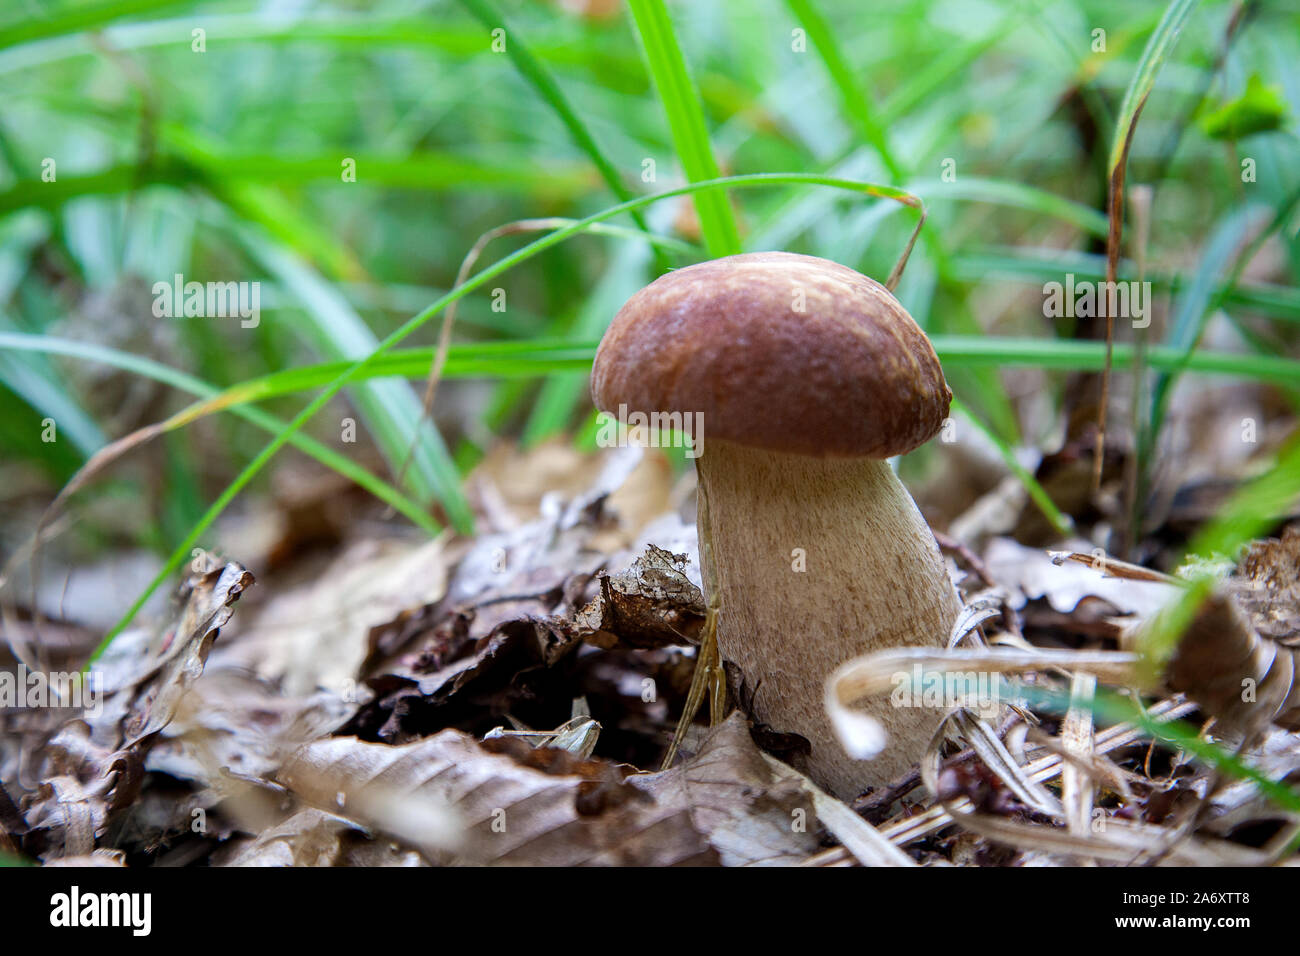 Boletus edulis (cep, penny bun, porcino or king bolete, usually called porcini mushroom) grows on the forest floor among moss, green grass and fallen Stock Photo